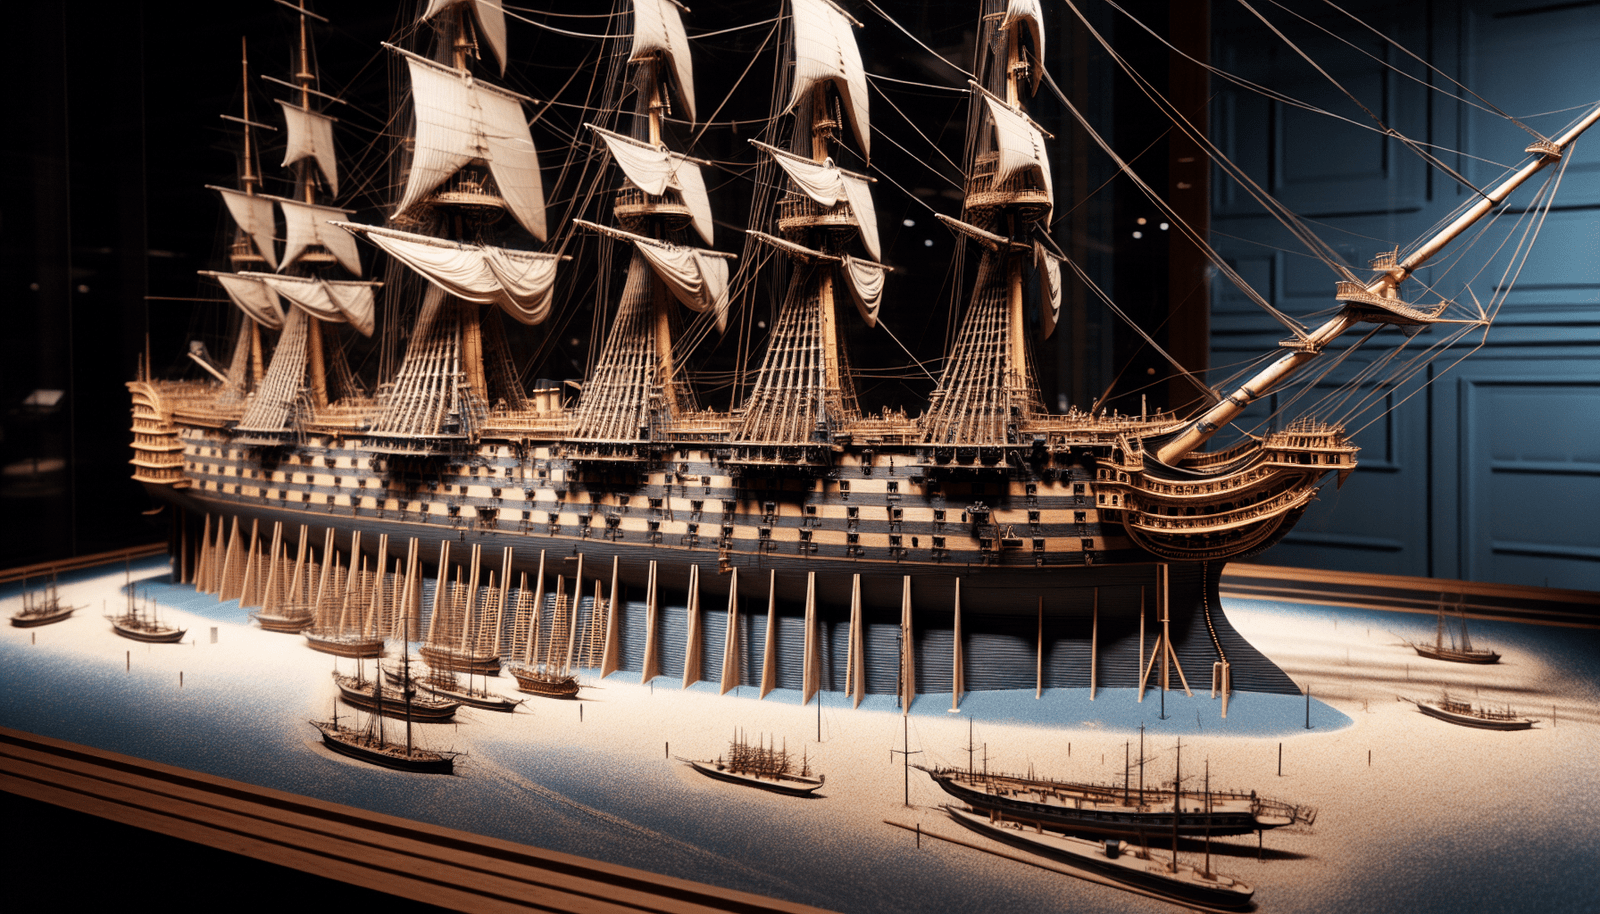 Discover Naval History At The Seaport Museum